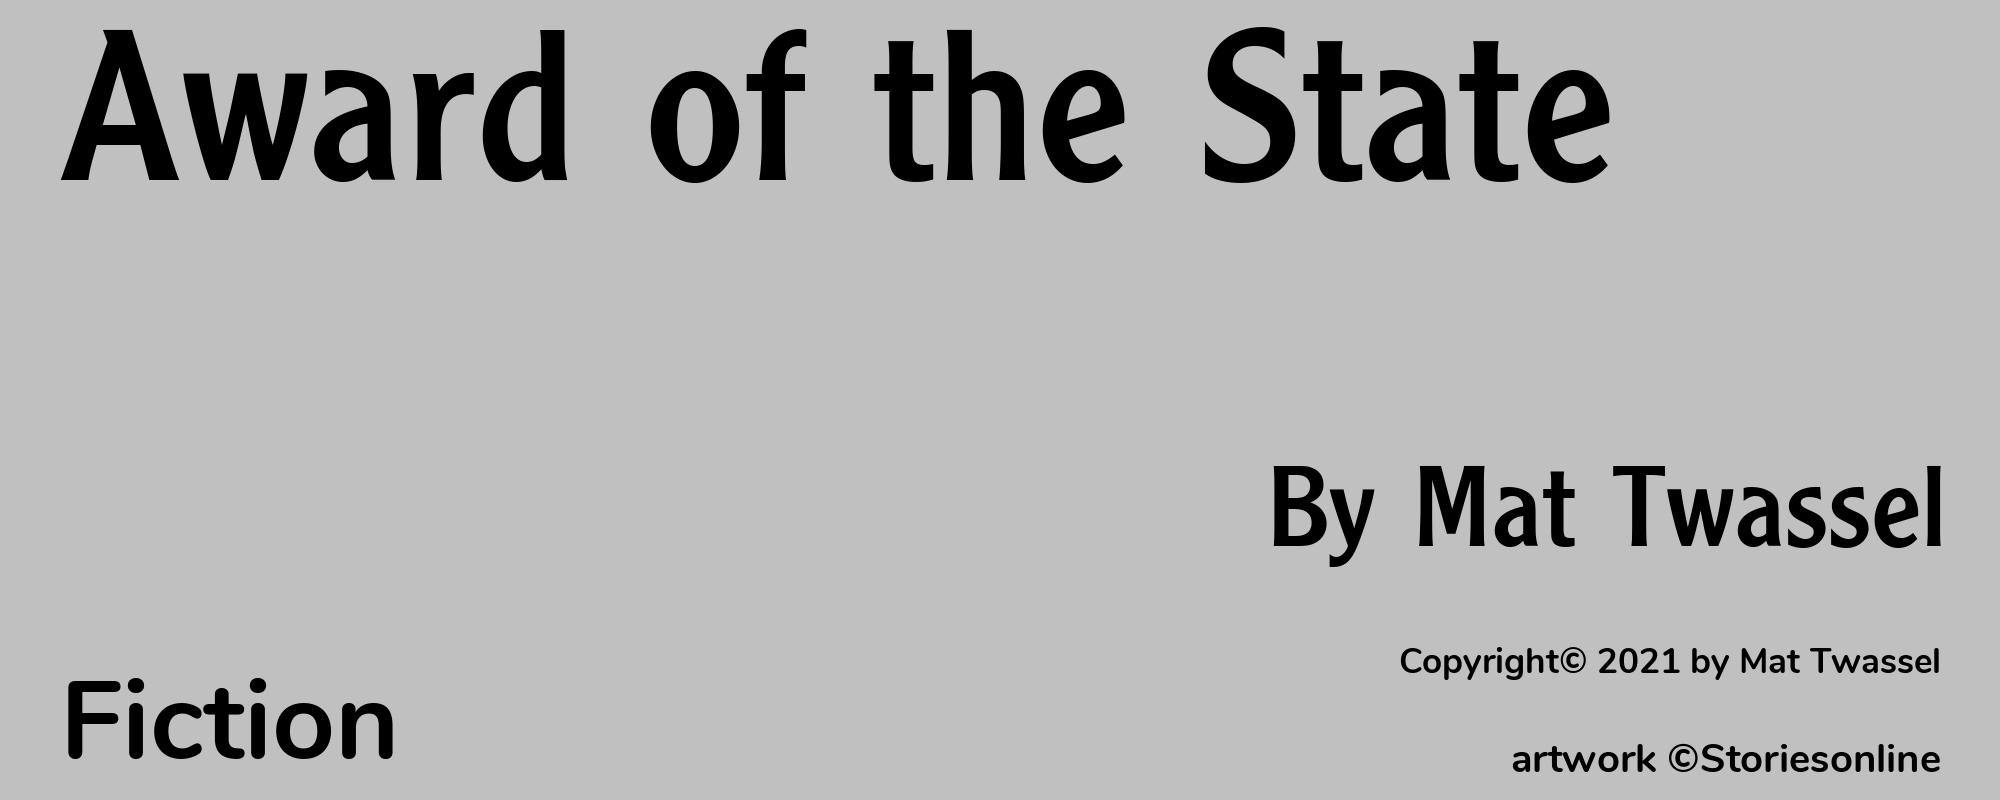 Award of the State - Cover